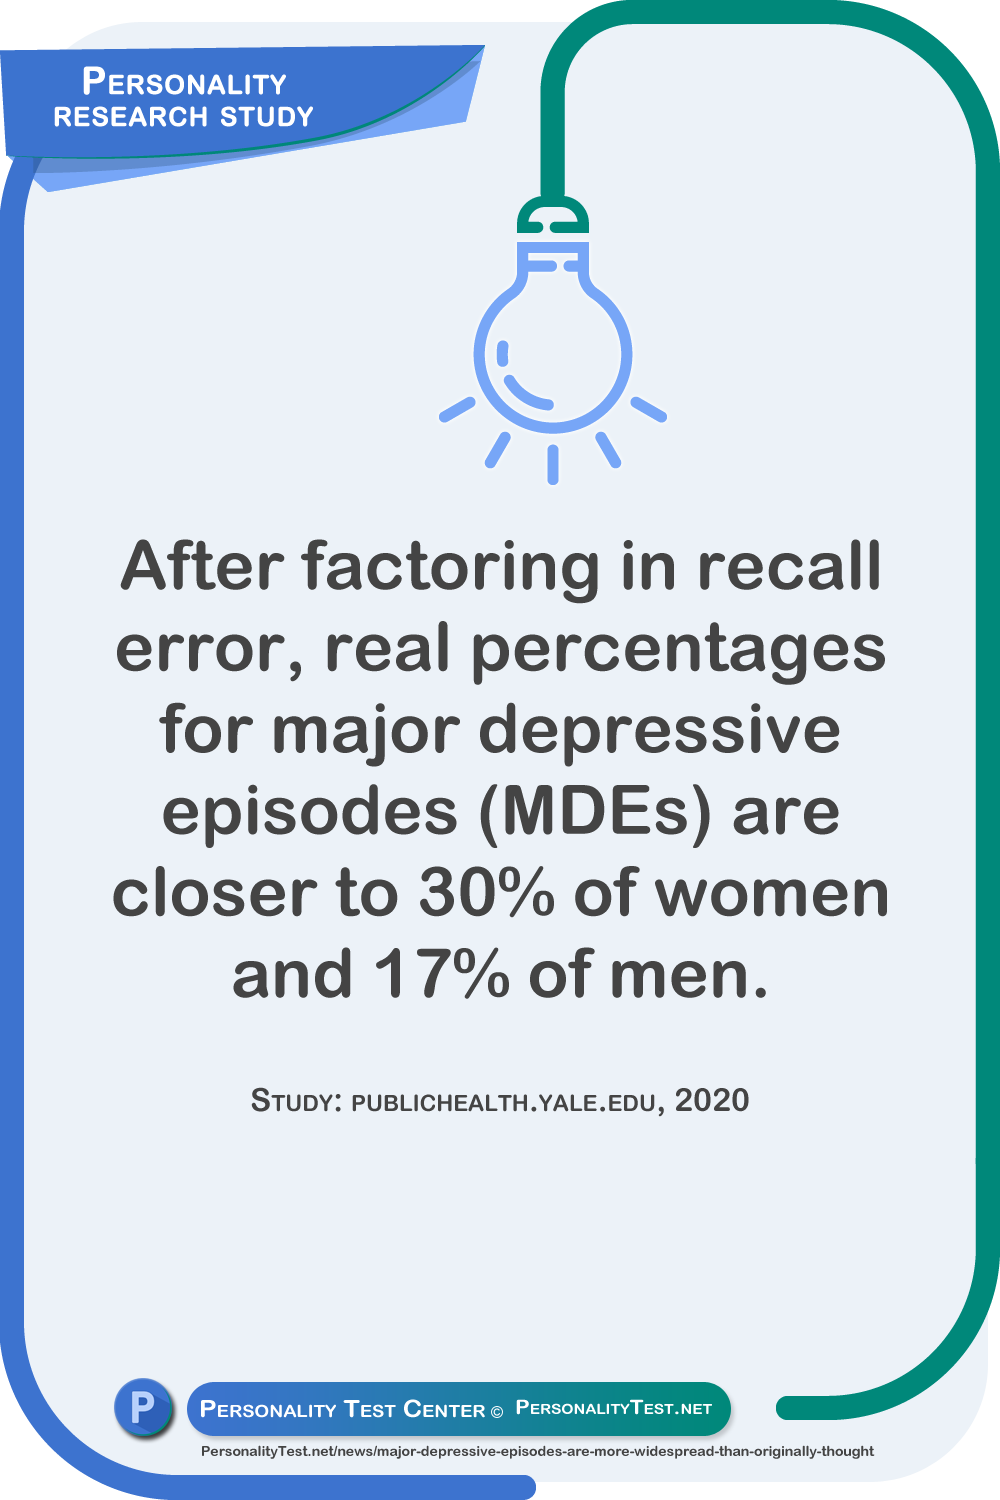 After factoring in recall error, real percentages for major depressive episodes (MDEs) are closer to 30% of women and 17% of men. Study: publichealth.yale.edu, 2020